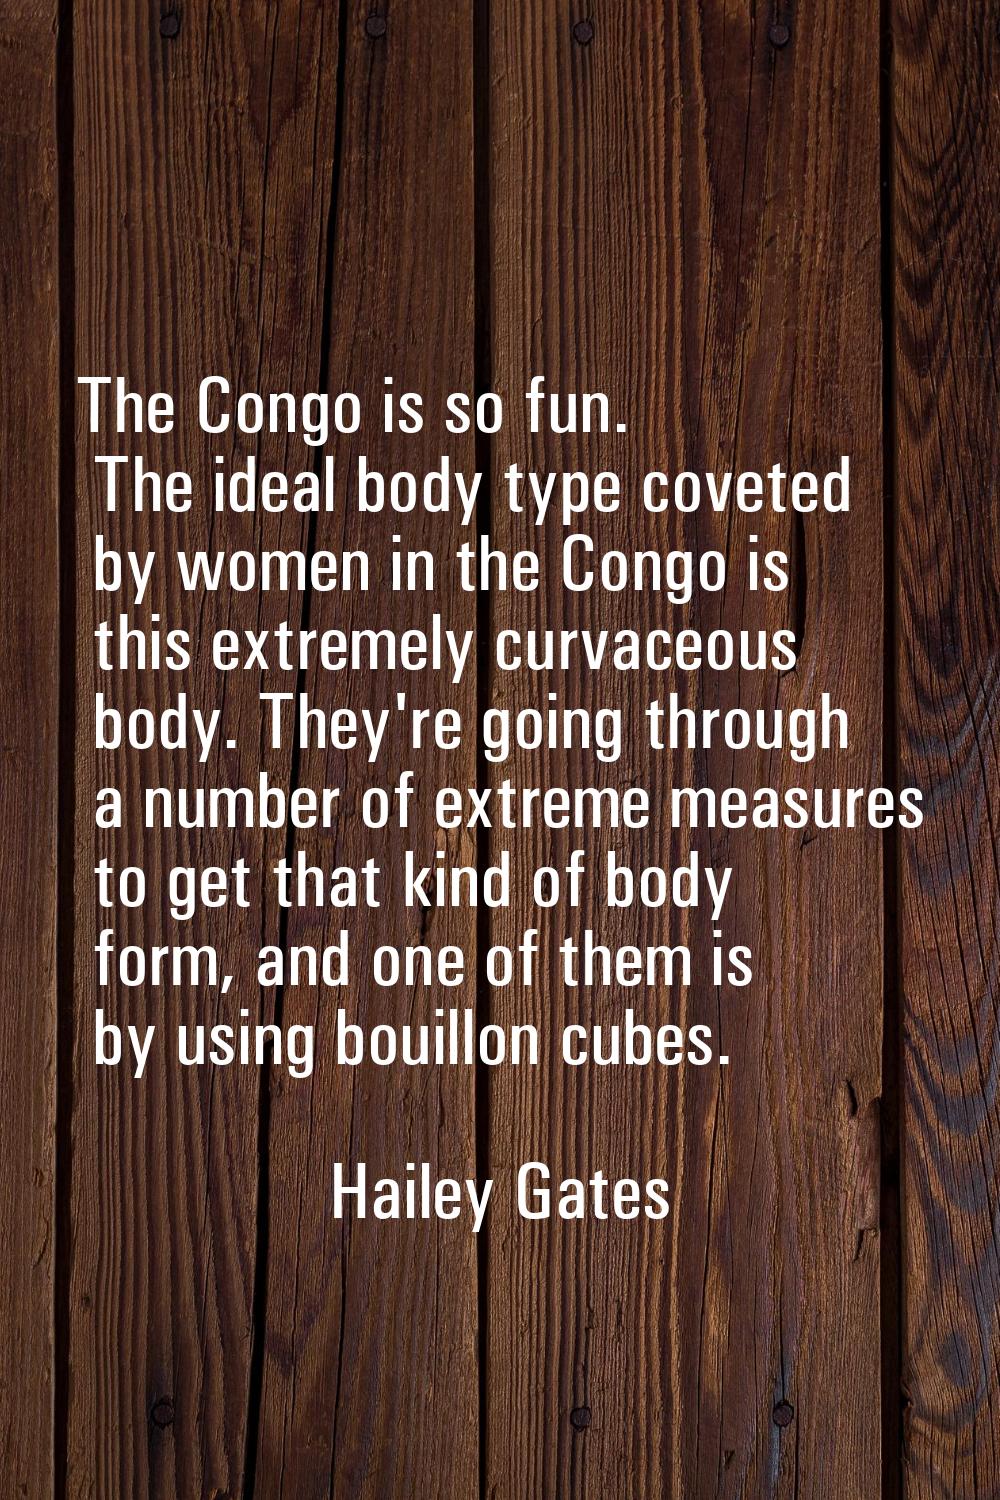 The Congo is so fun. The ideal body type coveted by women in the Congo is this extremely curvaceous